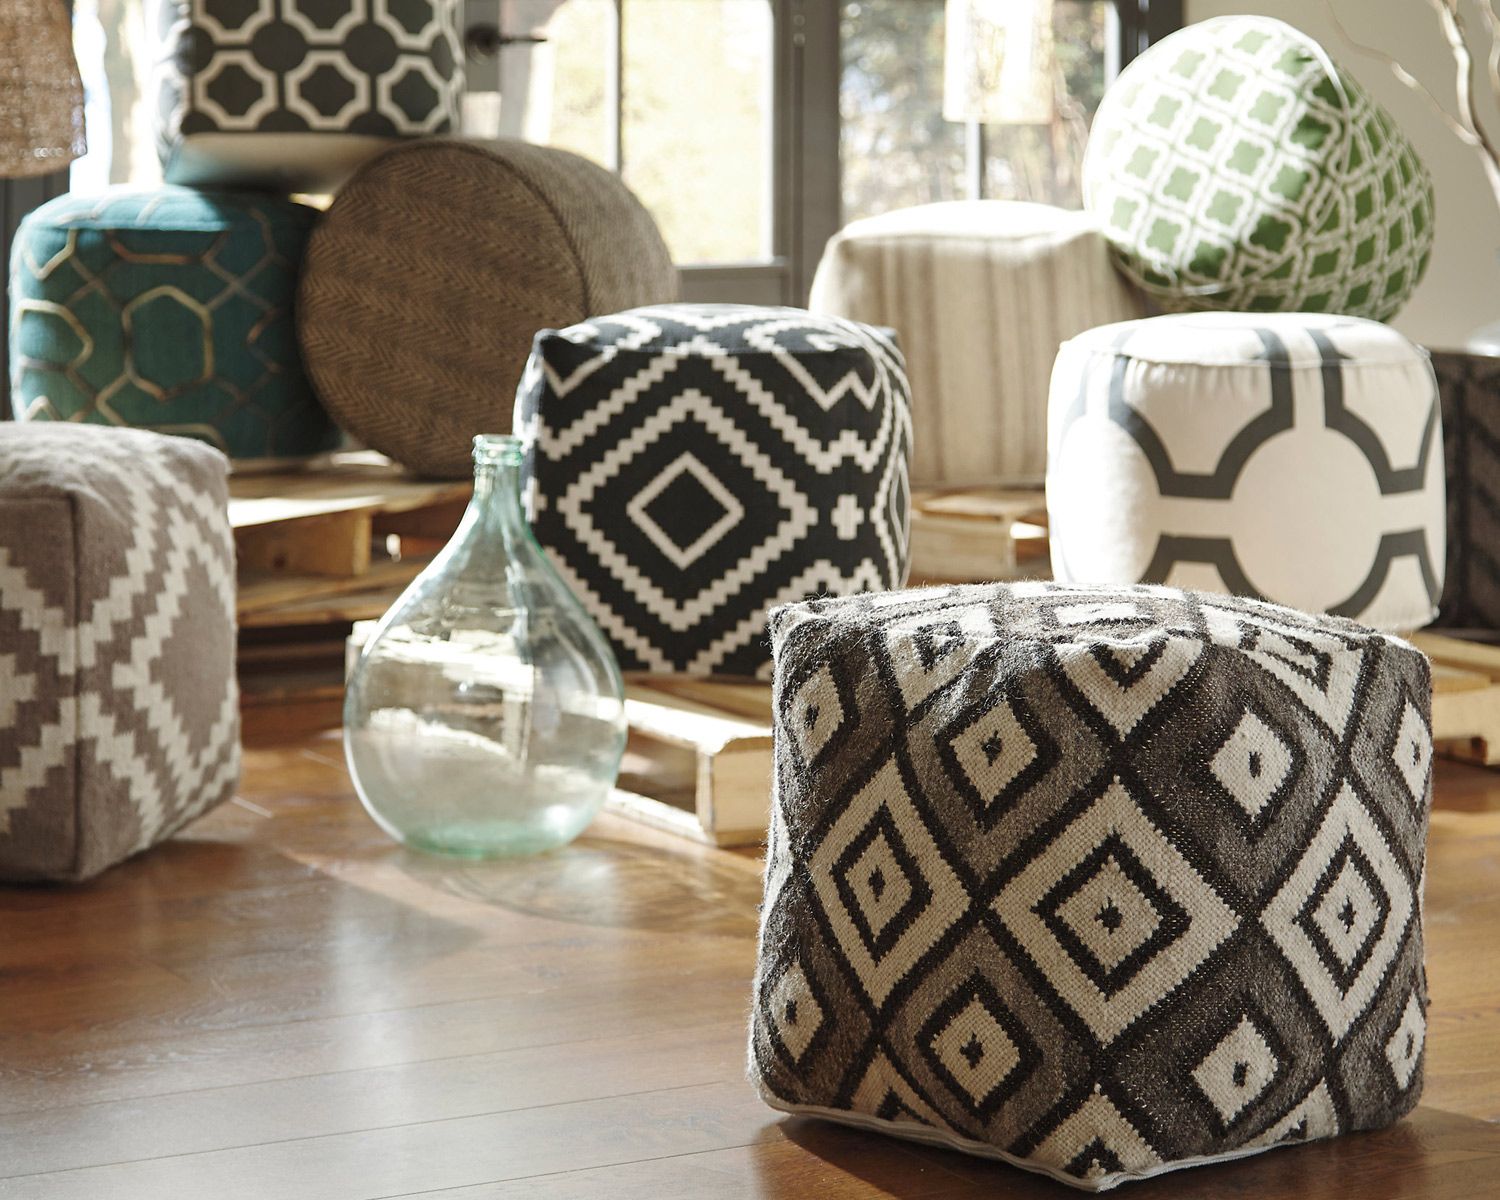 living room decor with pouf